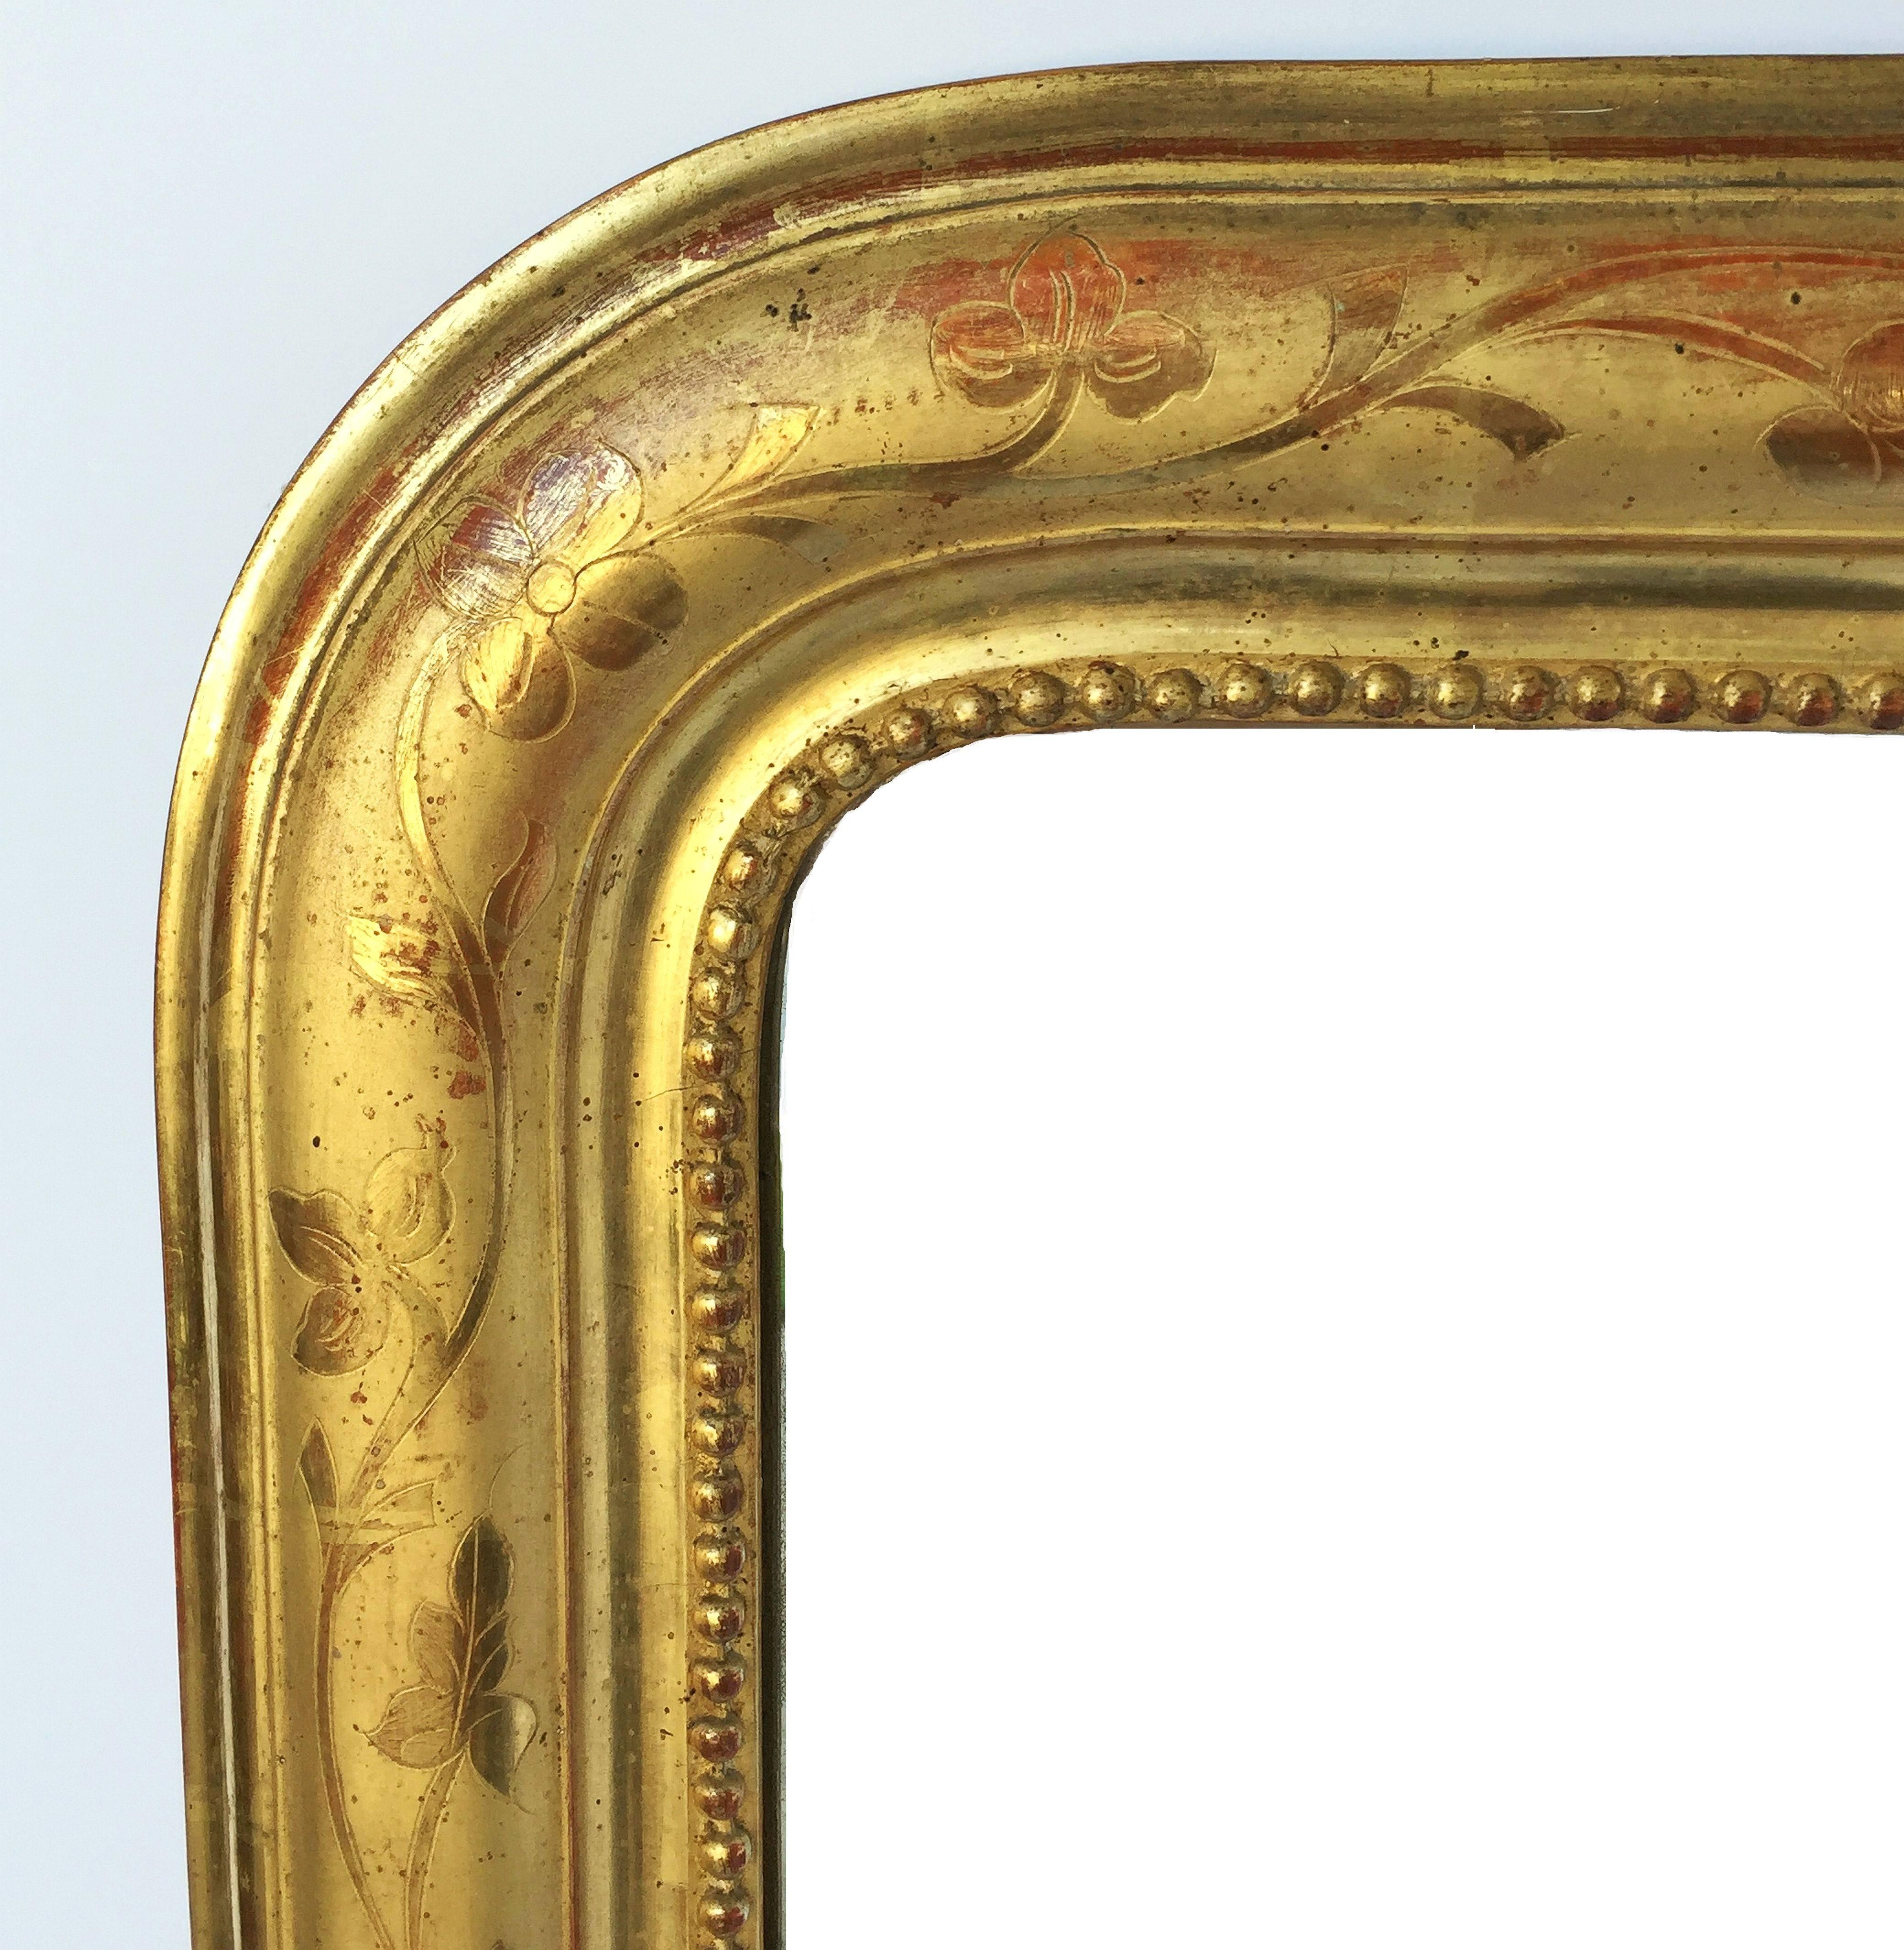 A handsome large Louis Philippe gilt wall mirror from France, featuring a lovely moulded surround and an etched foliate design showing through gold-leaf.

Dimensions: H 50 1/2 inches x W 29 1/2 inches.

Other sizes available in this style.